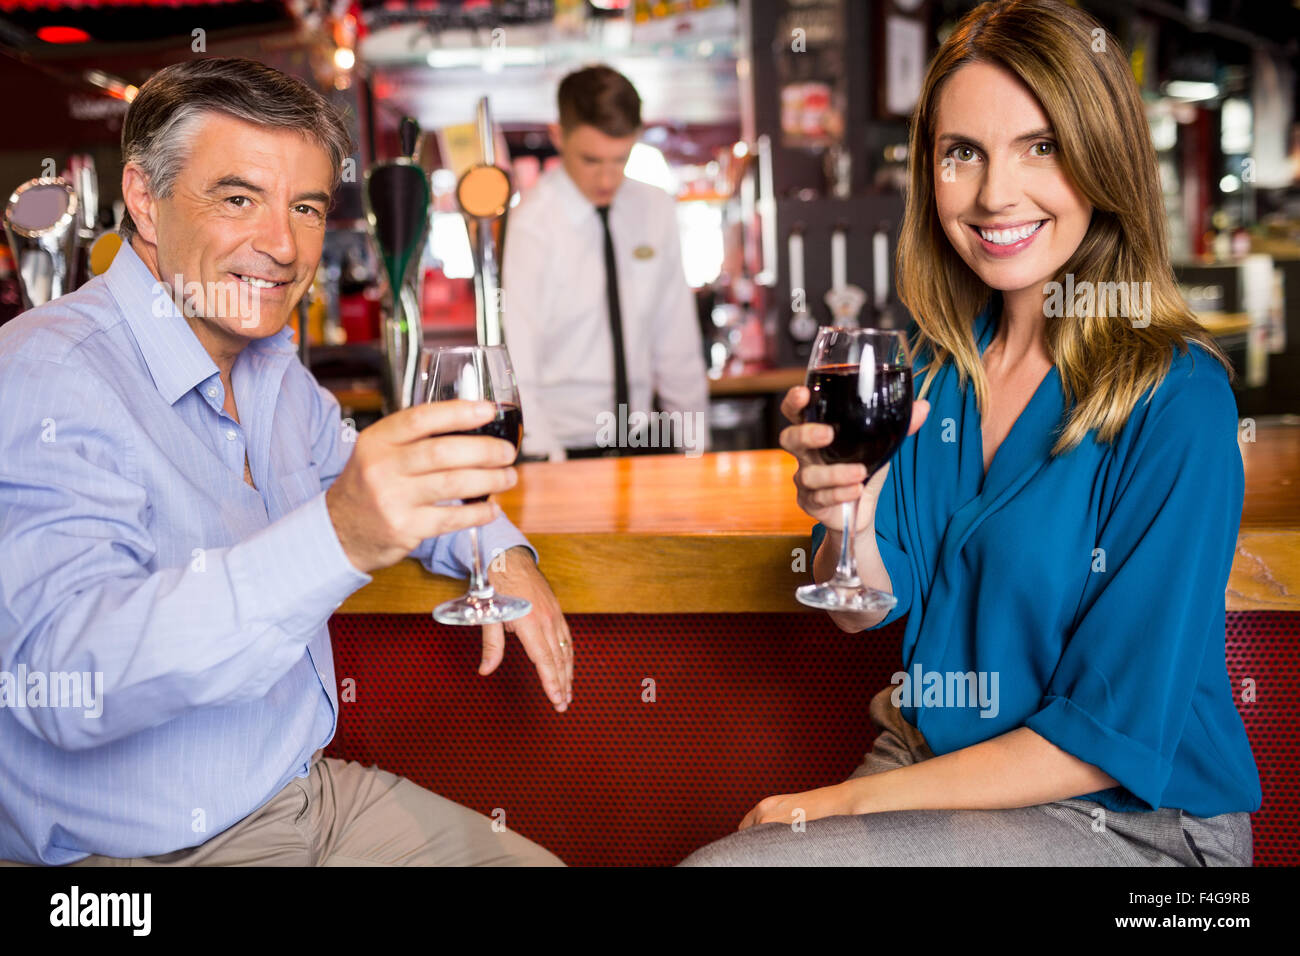 Colleagues having a drink after work Stock Photo